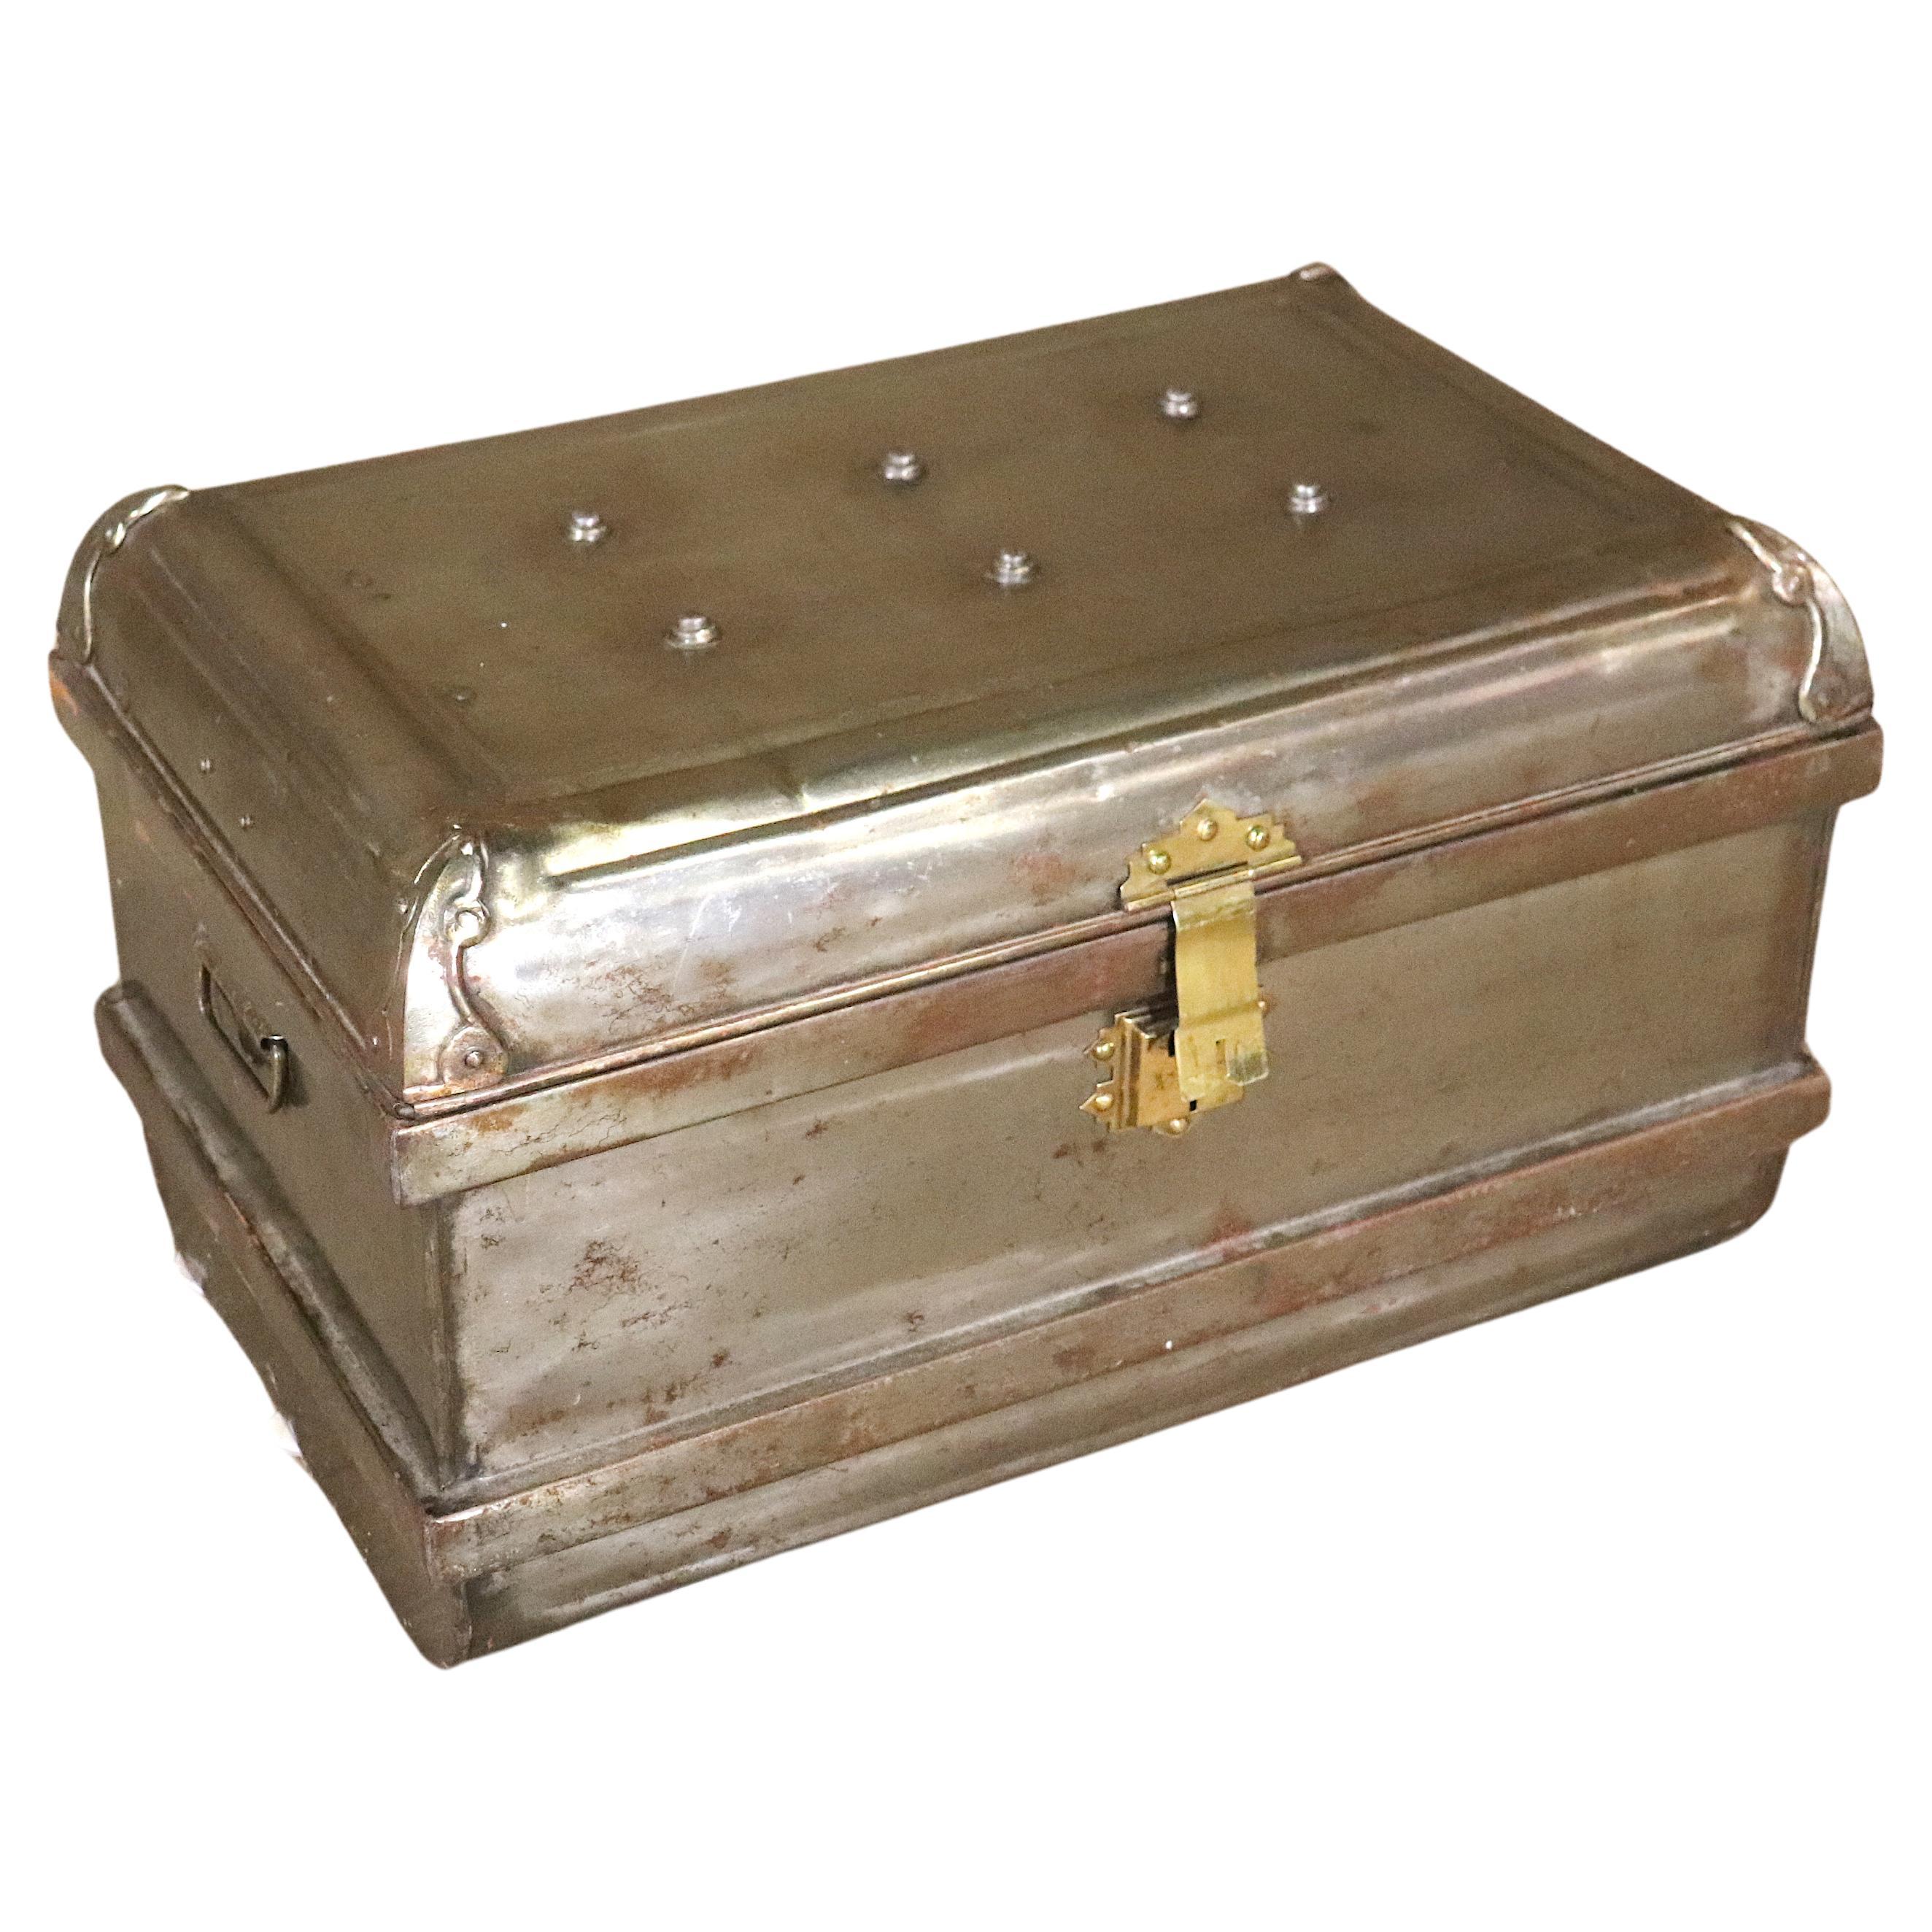 Steel Flip Top Trunk with Brass Lock by Bates For Sale